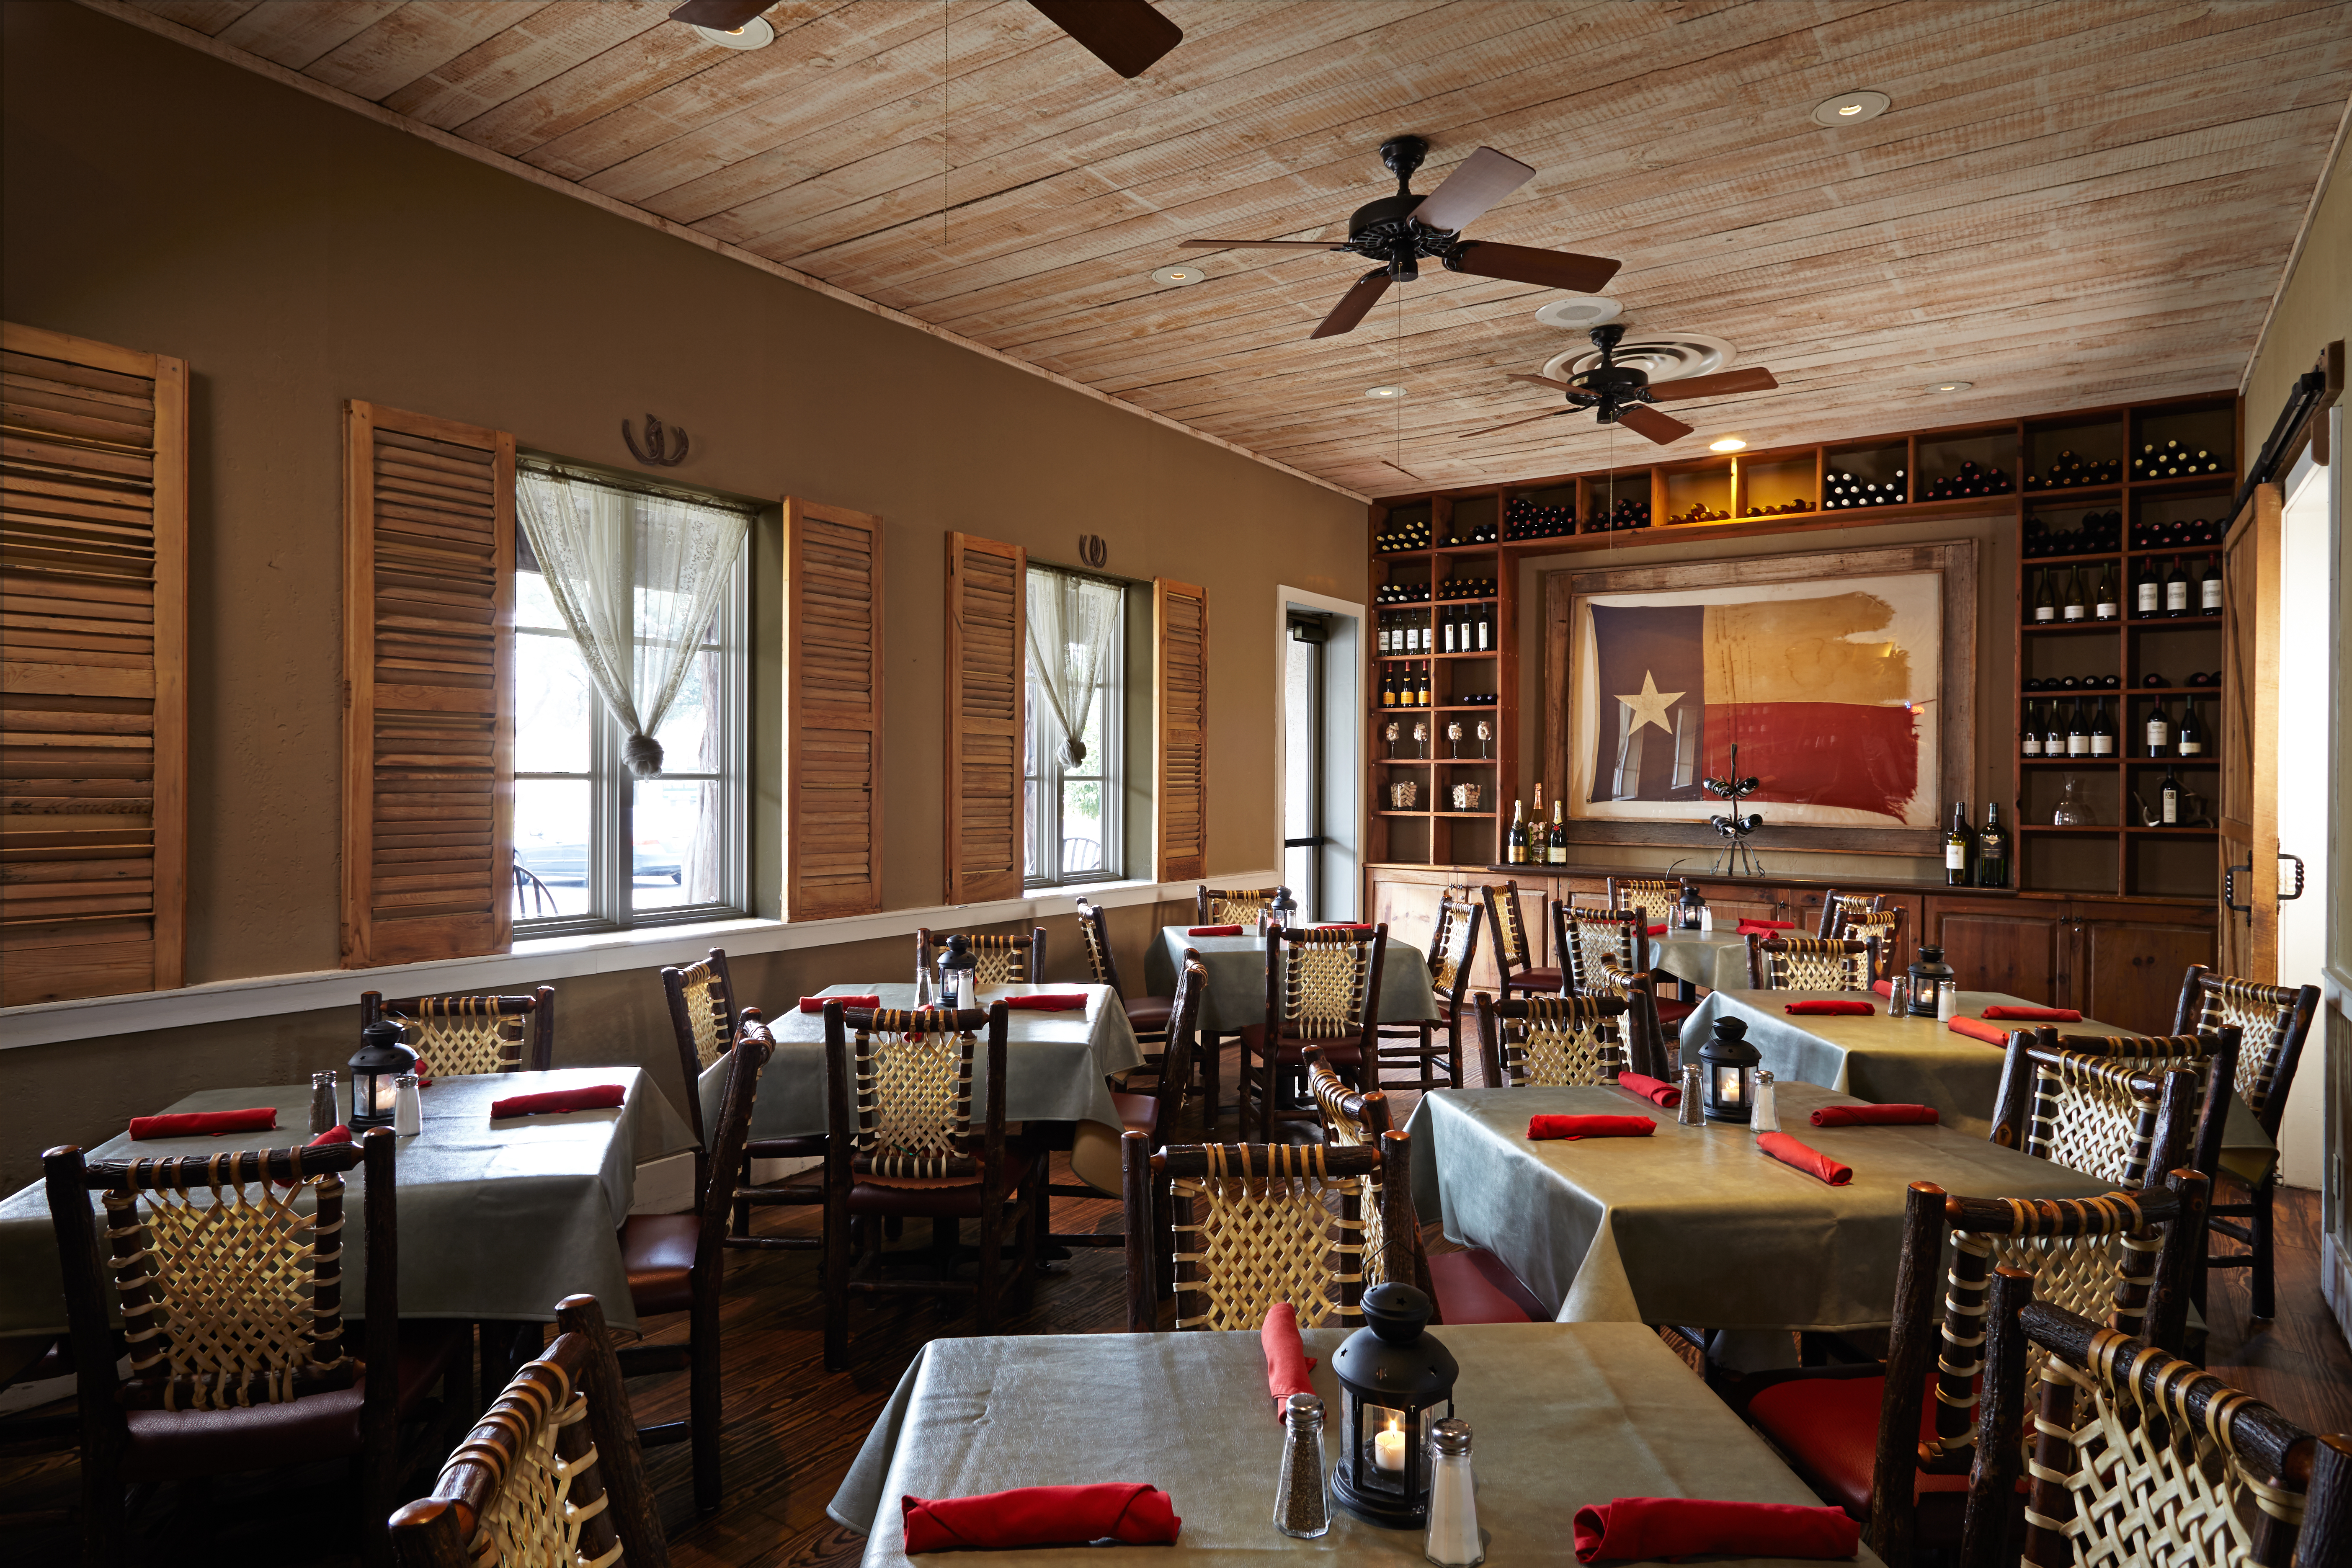 Rio Ranch Restaurant, Dining Space